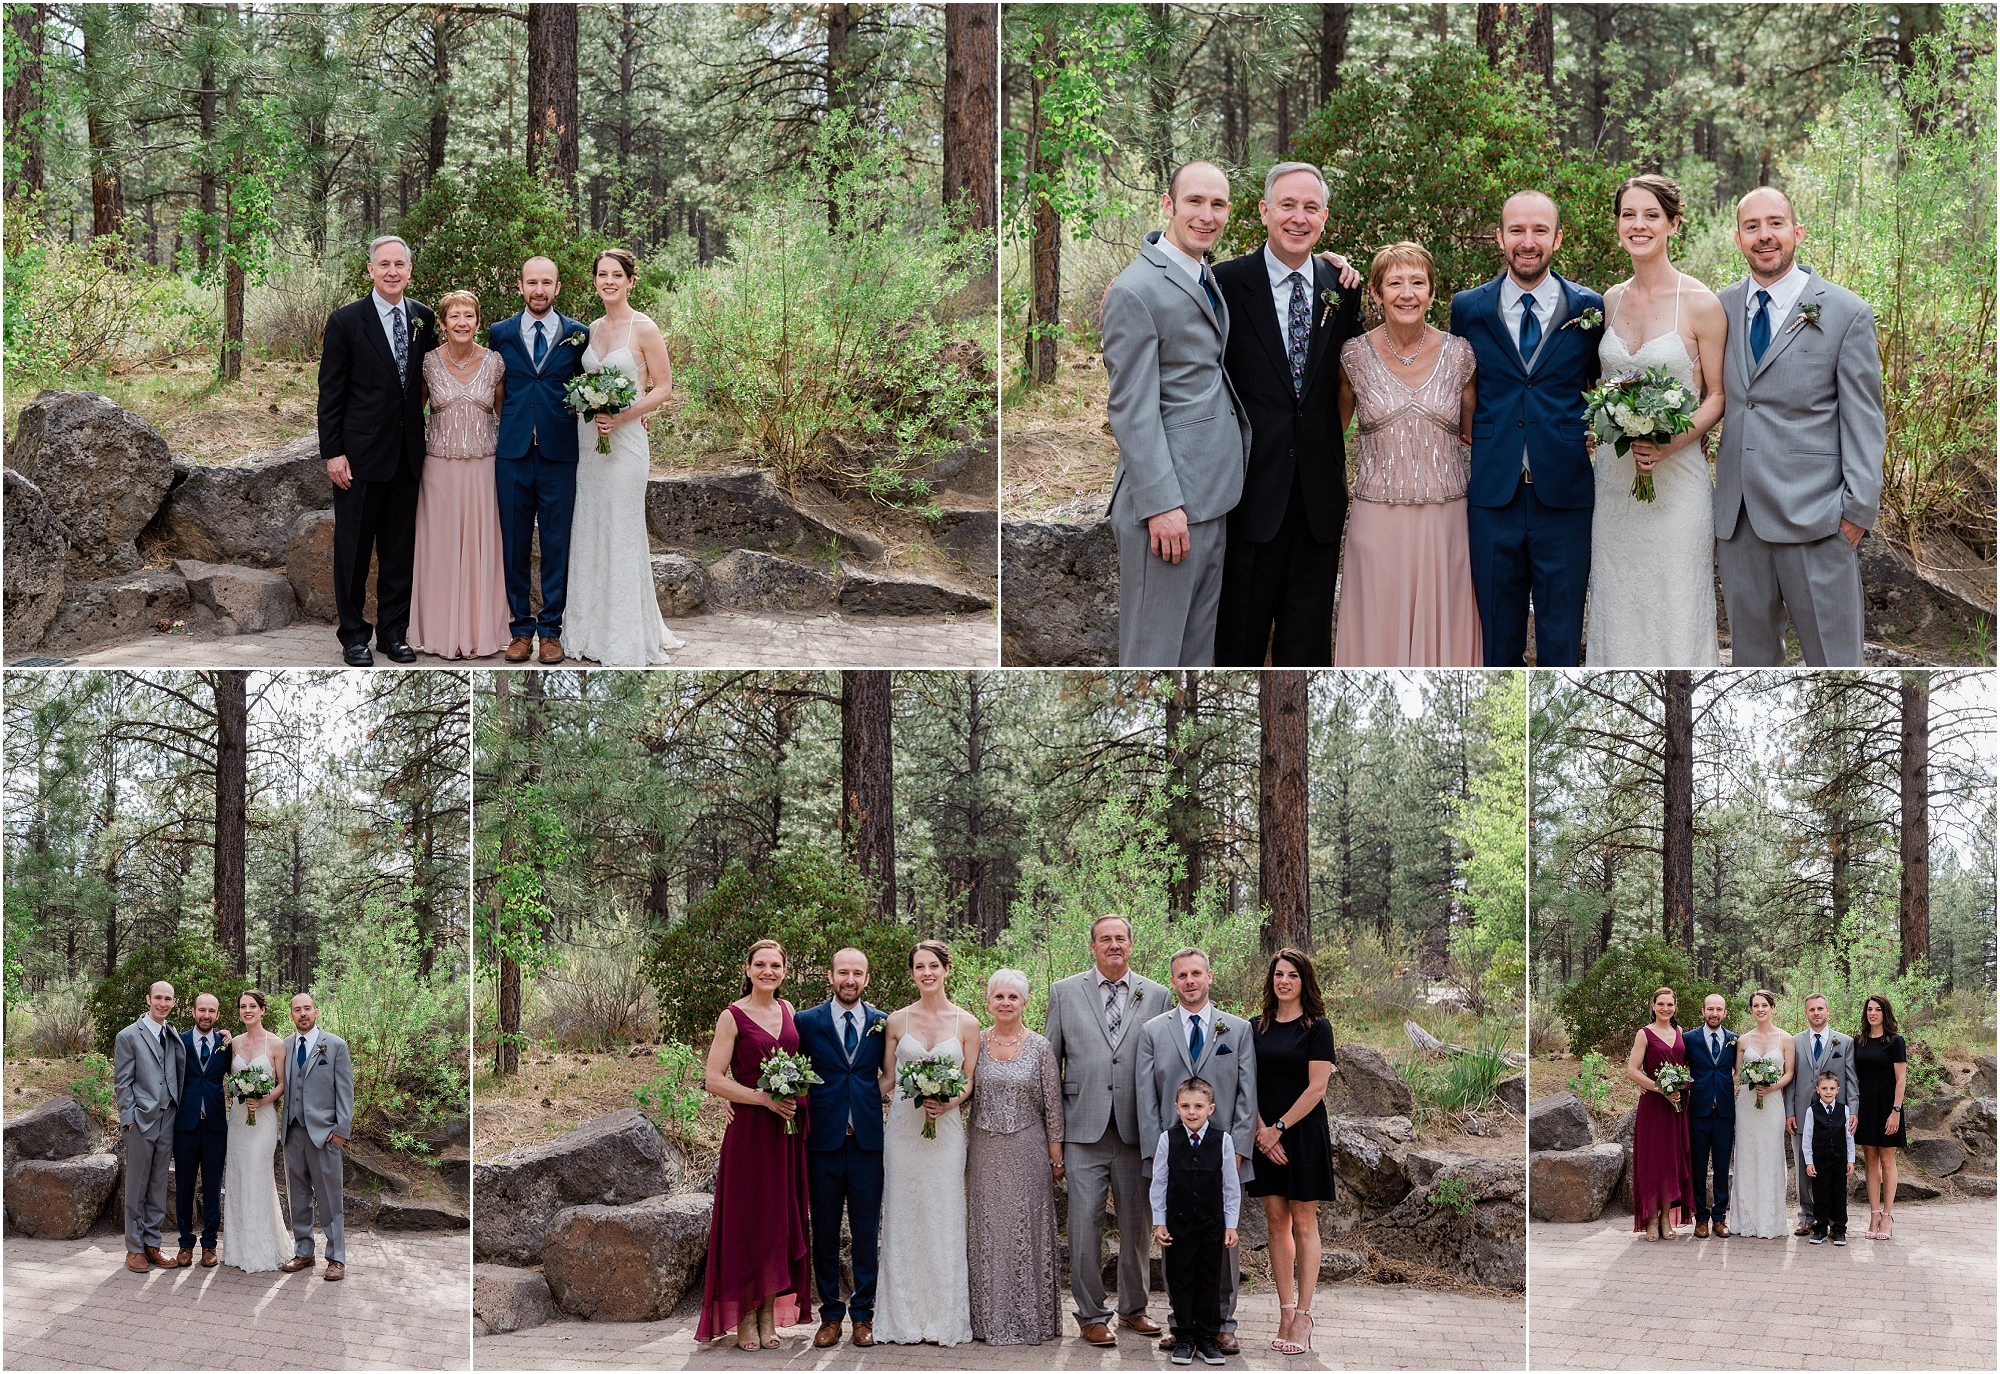 The groom and his bride with their families for their formal photos at this High Desert Museum Homestead spring wedding in Bend, OR. | Erica Swantek Photography